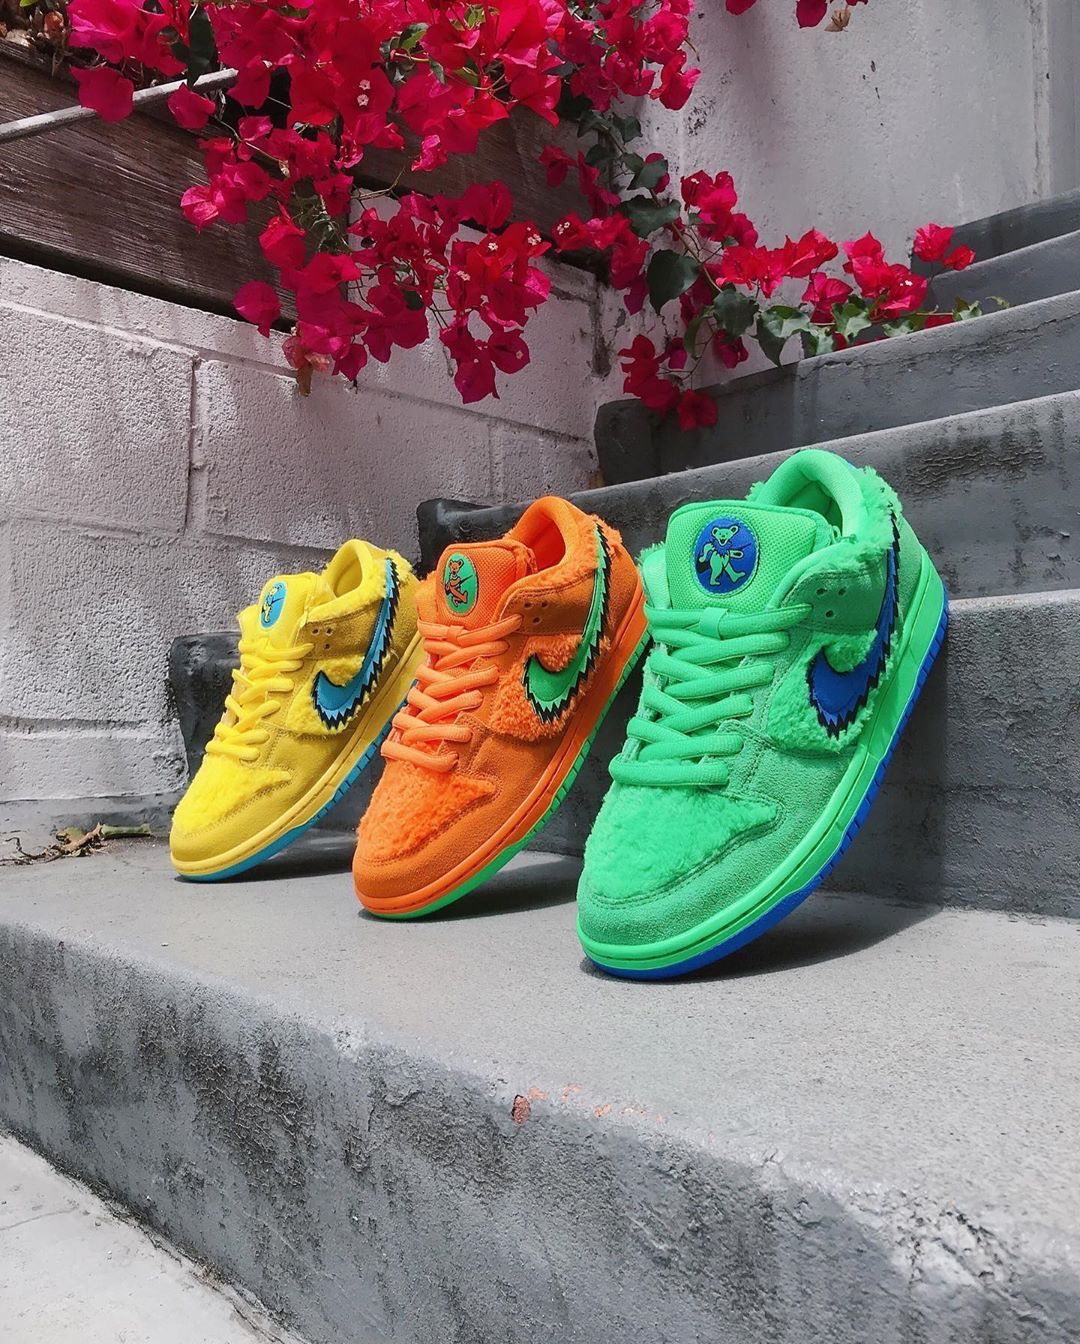 Nike and Grateful Dead Release SB Dunk Low Shoes Featuring Iconic Logos - That Eric Alper